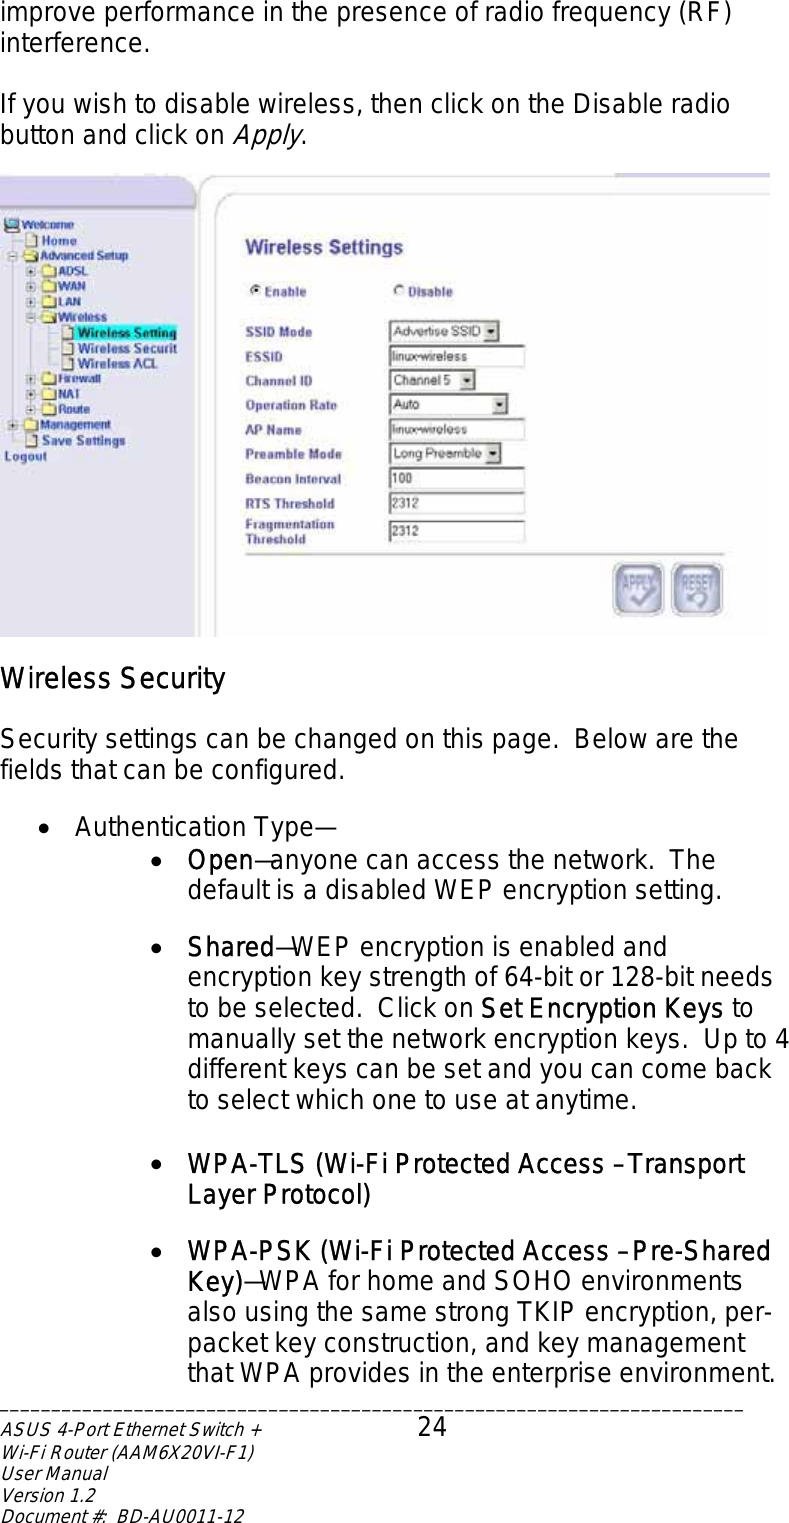 improve performance in the presence of radio frequency (RF) interference.  If you wish to disable wireless, then click on the Disable radio button and click on Apply.   Wireless Security  Security settings can be changed on this page.  Below are the fields that can be configured.  •  Authentication Type— •  Open—anyone can access the network.  The default is a disabled WEP encryption setting.  •  Shared—WEP encryption is enabled and encryption key strength of 64-bit or 128-bit needs to be selected.  Click on Set Encryption Keys to manually set the network encryption keys.  Up to 4 different keys can be set and you can come back to select which one to use at anytime.  •  WPA-TLS (Wi-Fi Protected Access – Transport Layer Protocol)  •  WPA-PSK (Wi-Fi Protected Access – Pre-Shared Key)—WPA for home and SOHO environments also using the same strong TKIP encryption, per-packet key construction, and key management that WPA provides in the enterprise environment.  ________________________________________________________________________ASUS 4-Port Ethernet Switch +  24 Wi-Fi Router (AAM6X20VI-F1) User Manual                                                                         Version 1.2 Document #:  BD-AU0011-12  